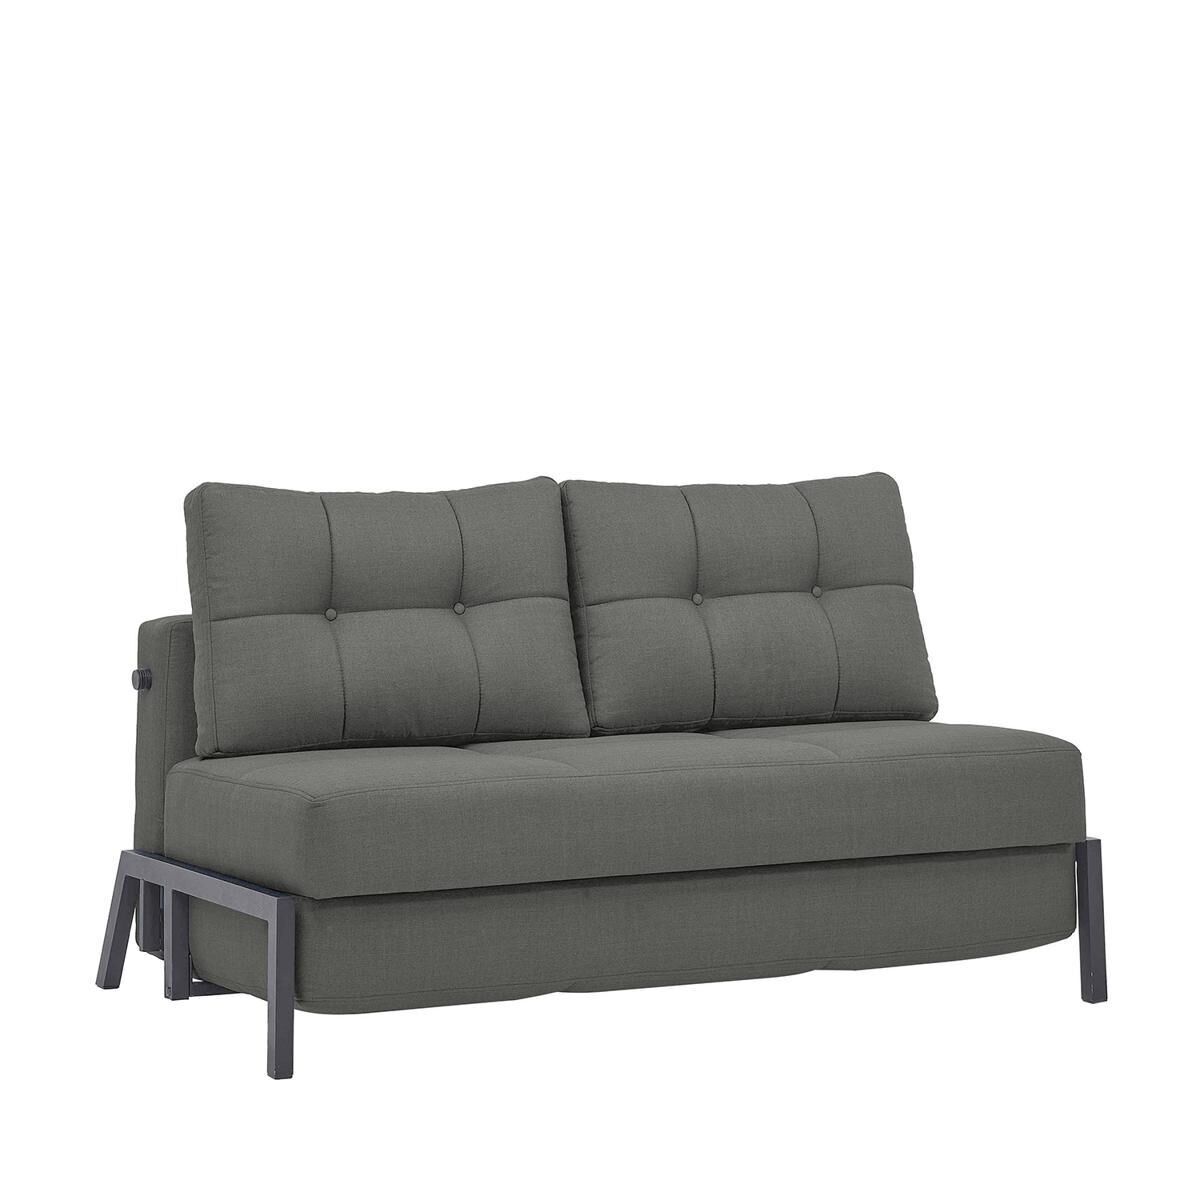 GAEL Two Seater Sofa-Bed Gray 150x91x90cm